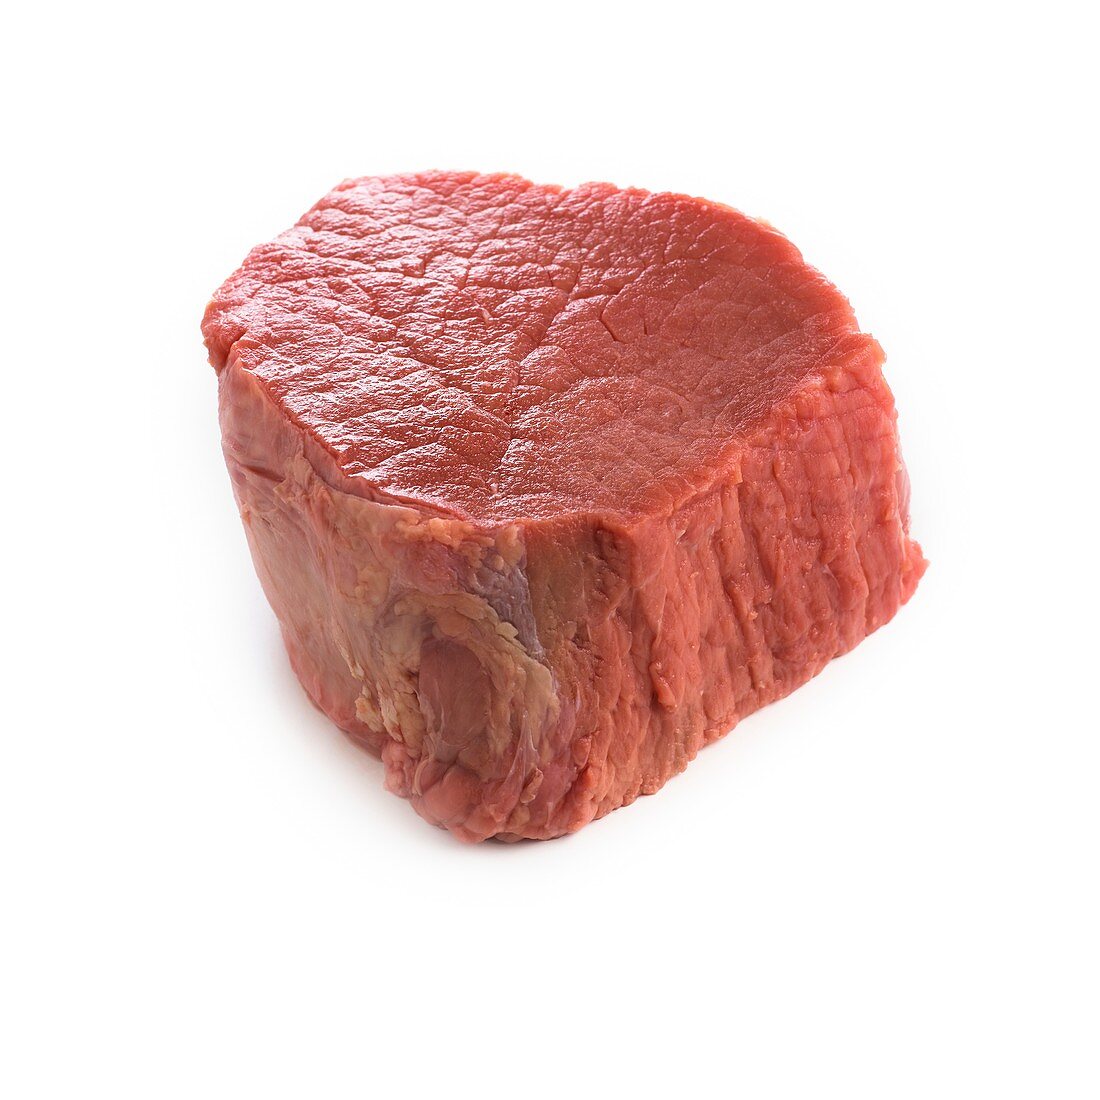 Red meat